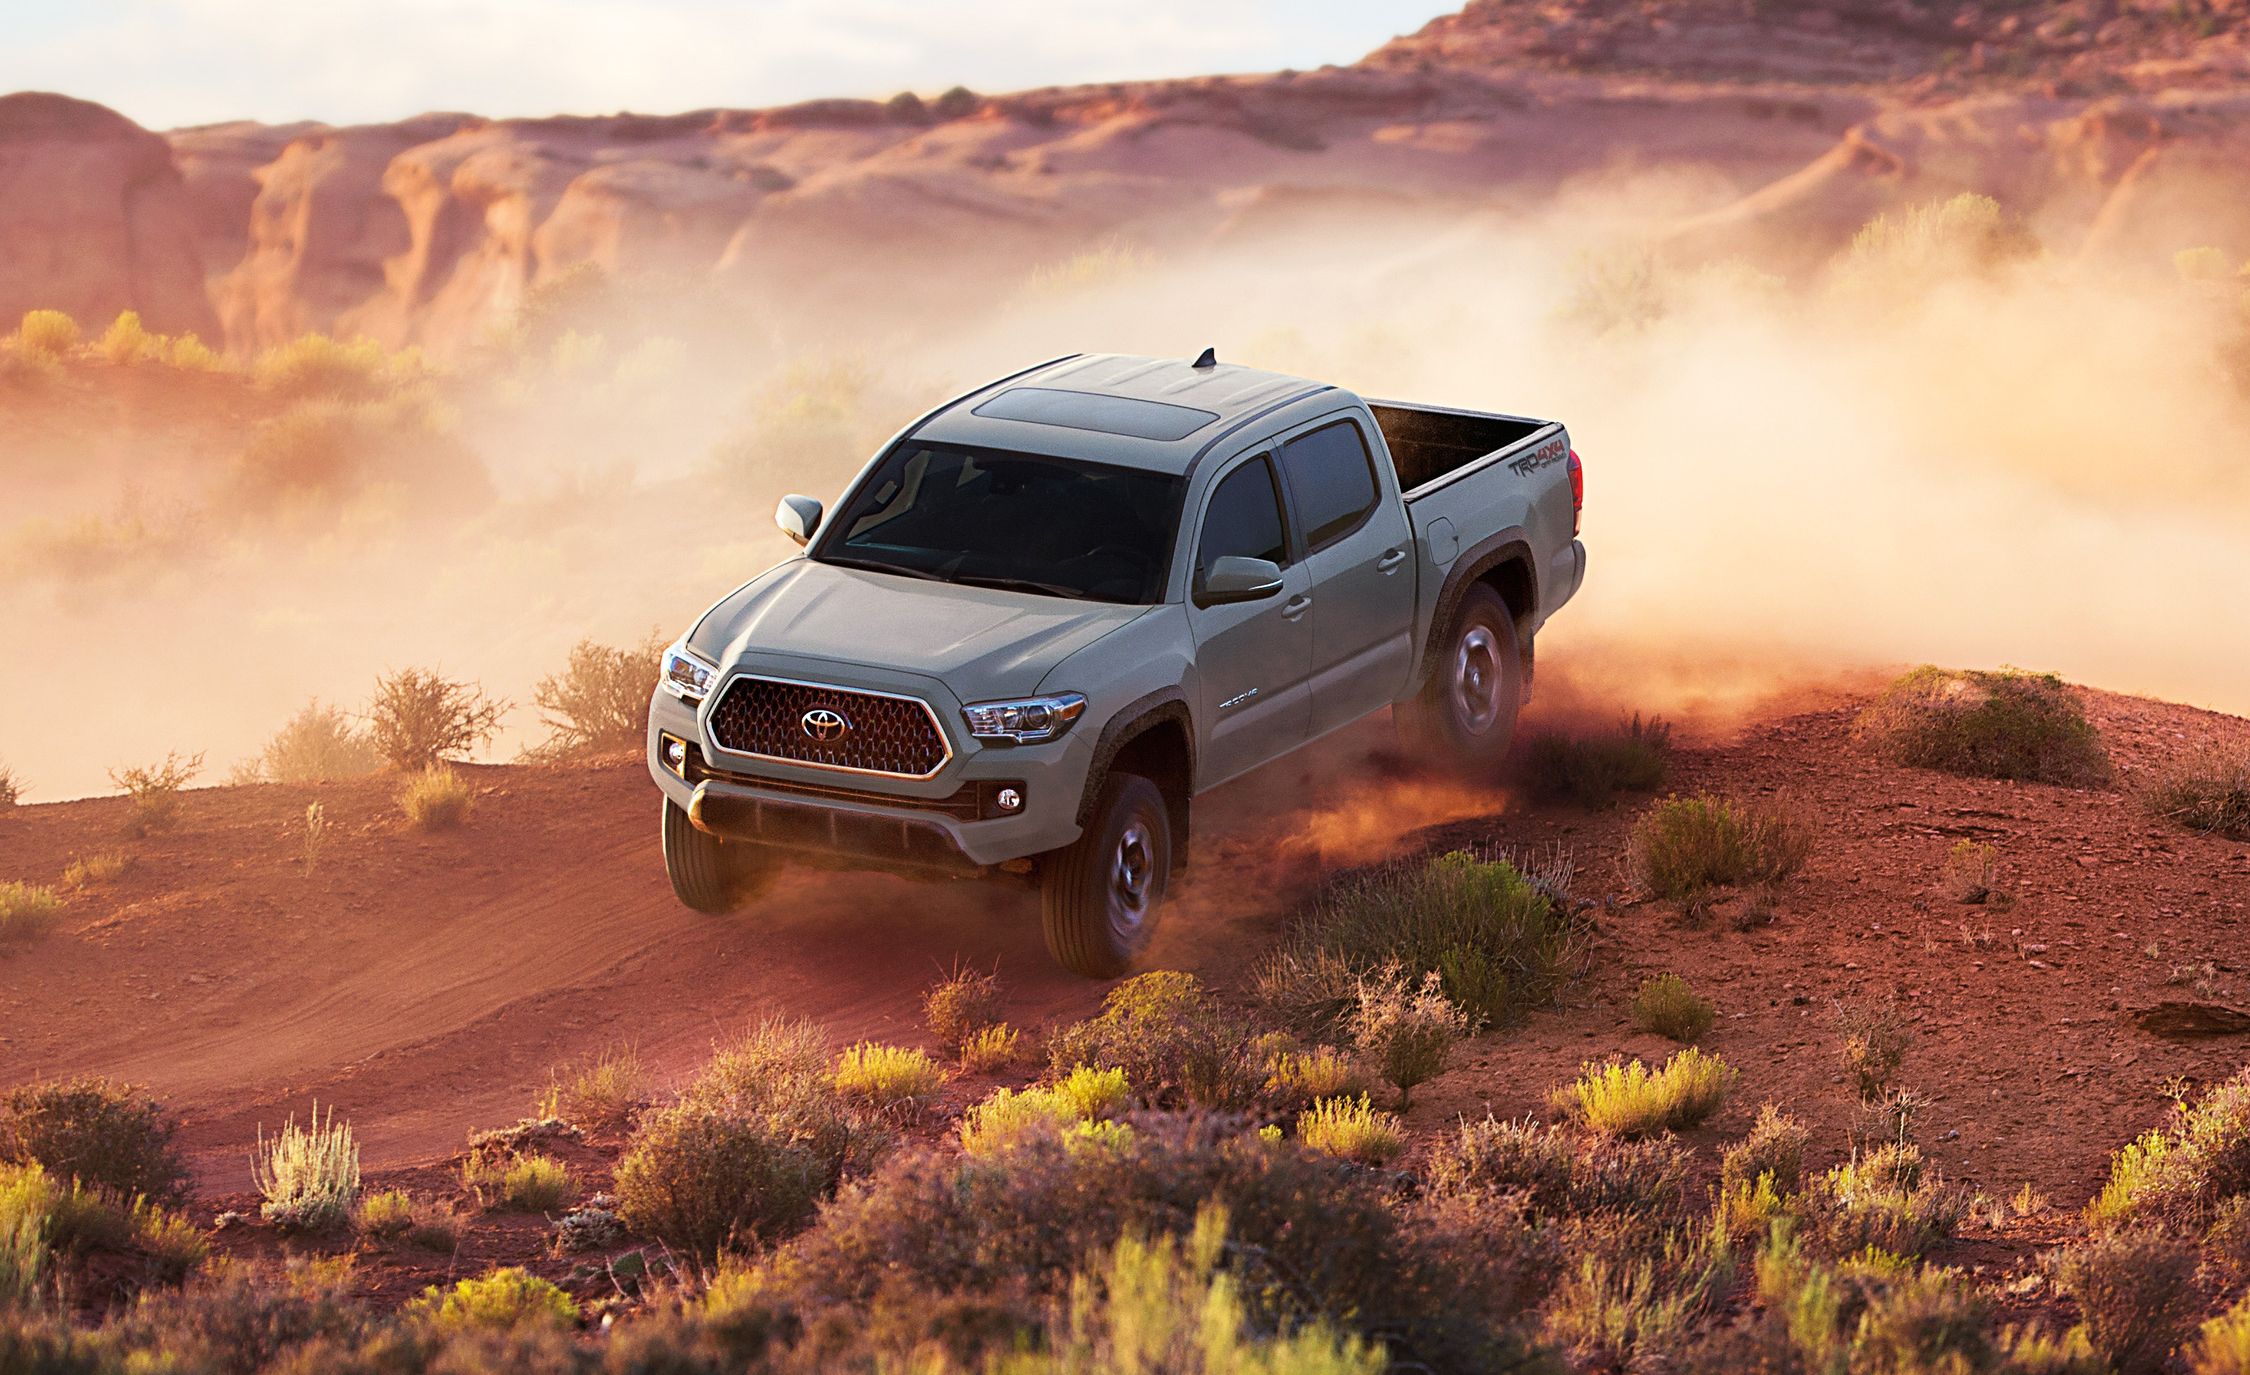 Kelley Blue Book allows test drives at home for Toyota Tacoma trucks that are for sale.